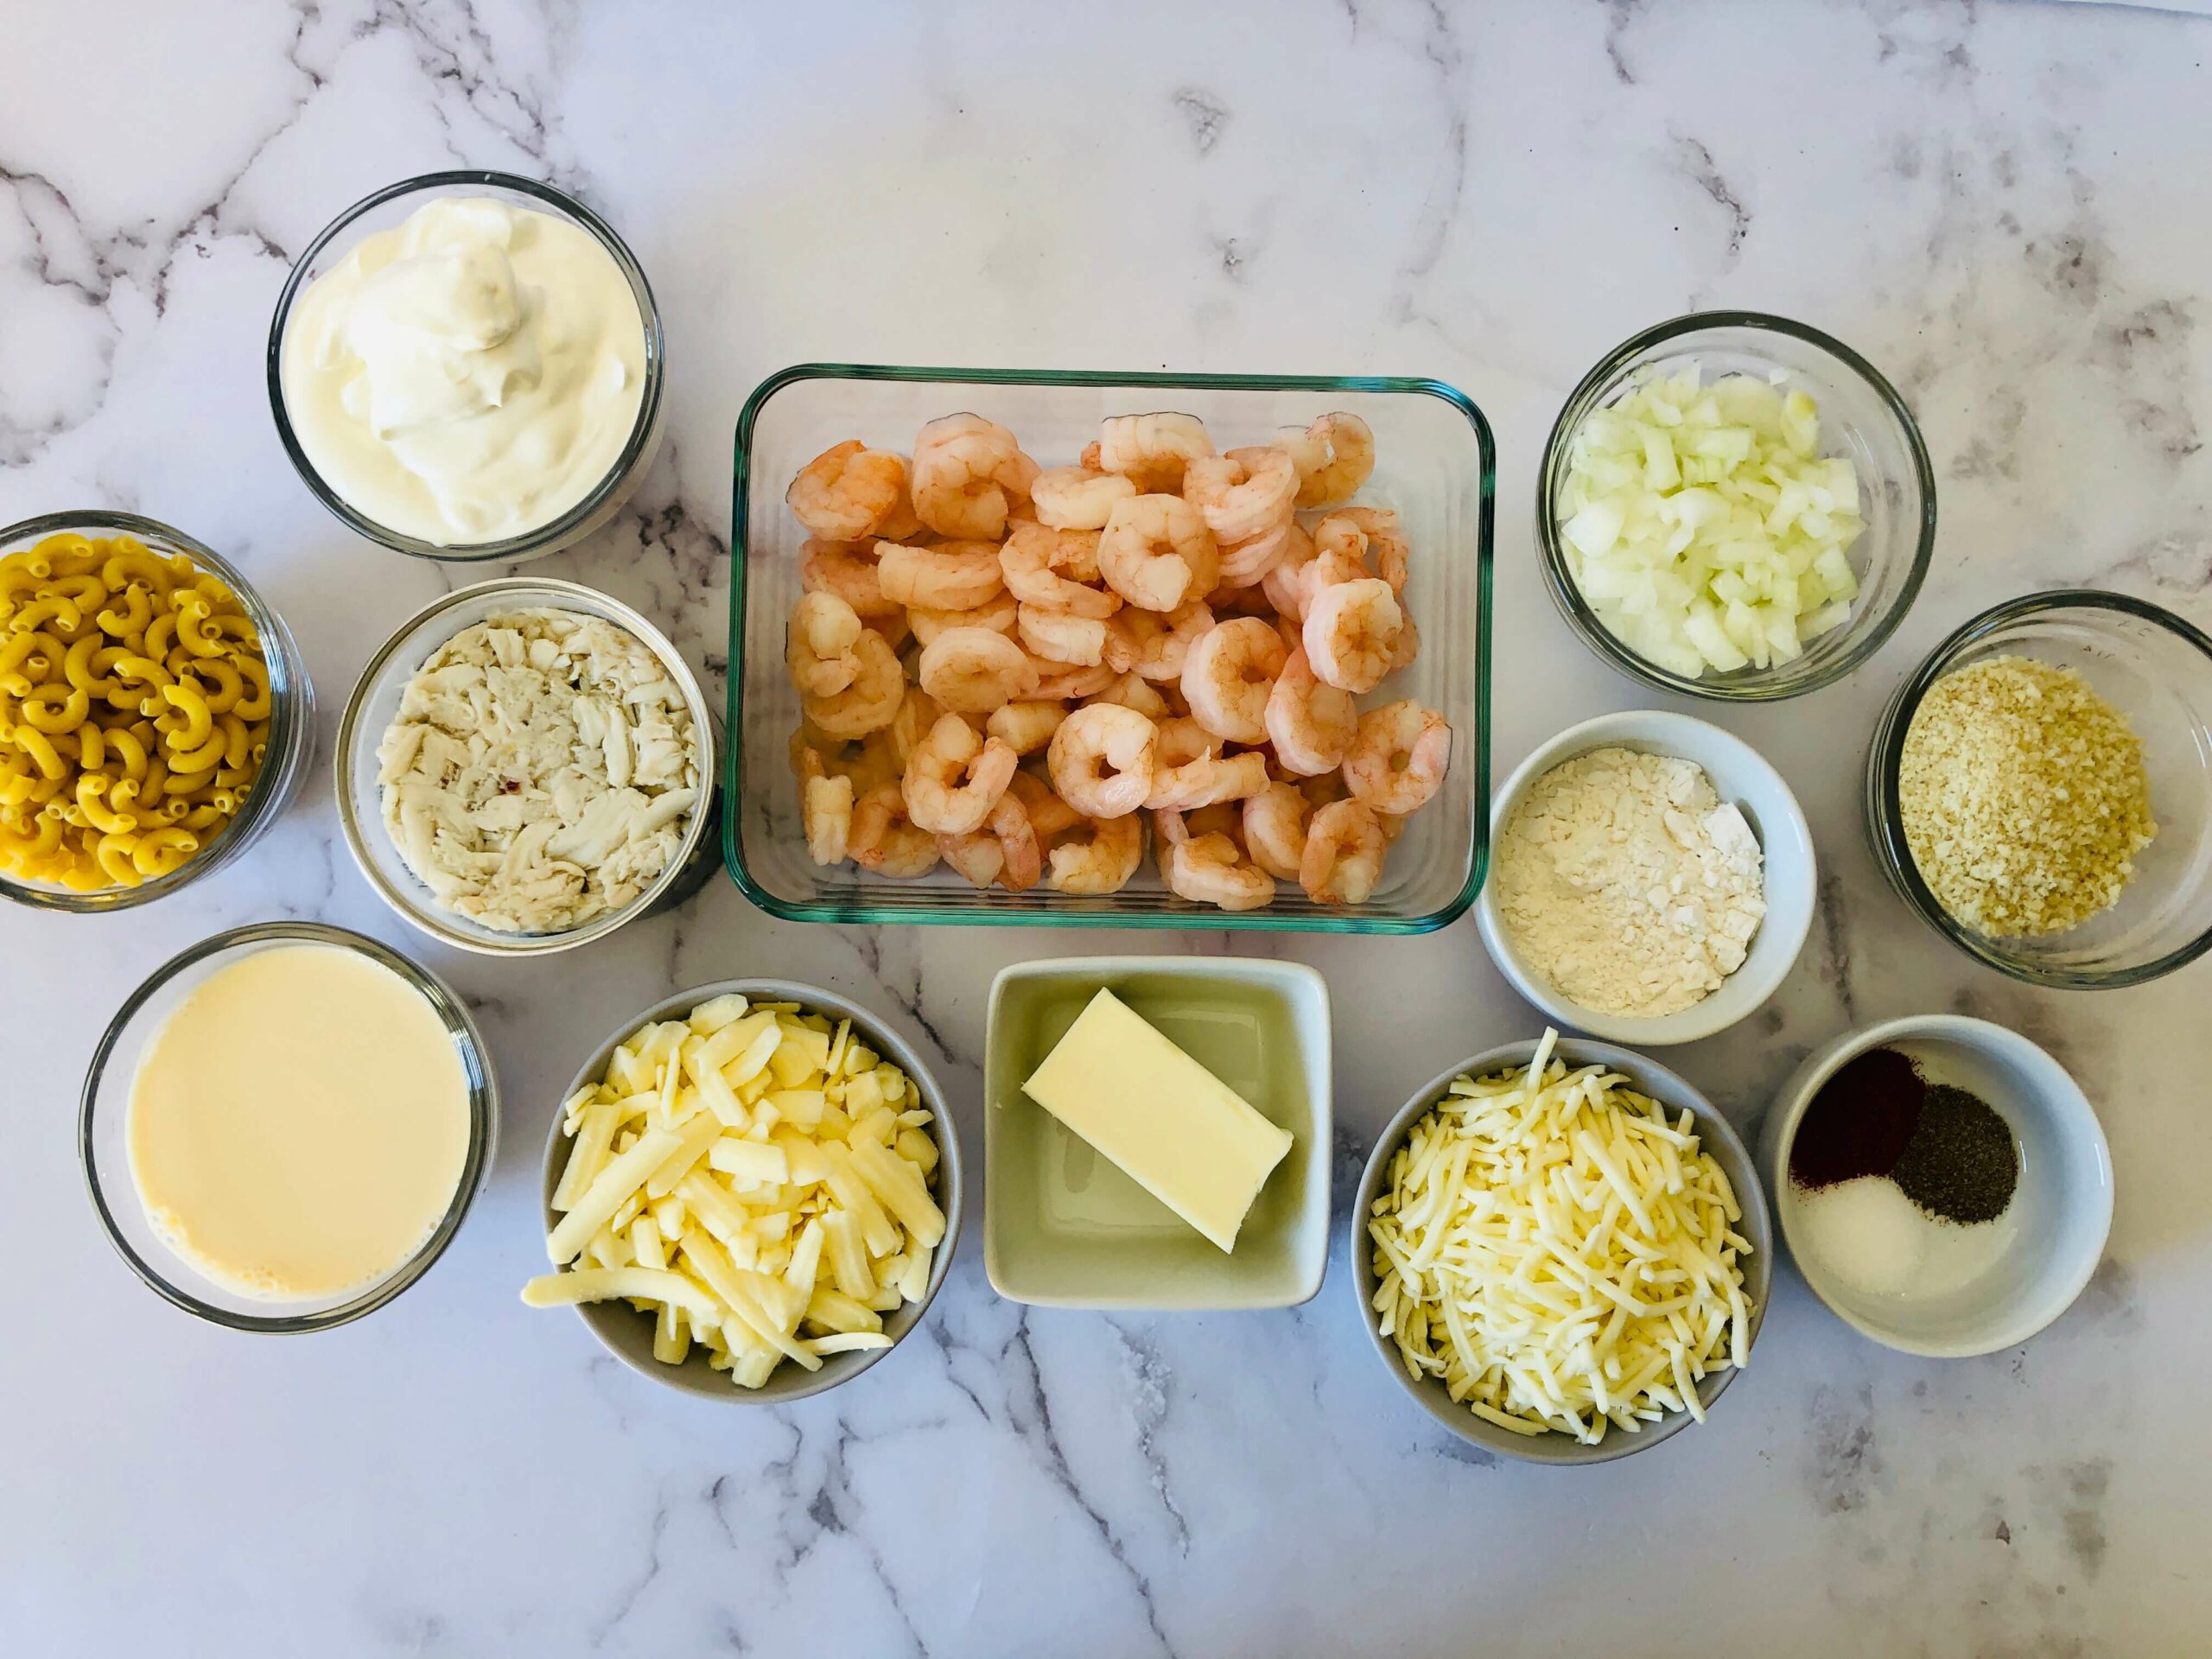 Pasta, cheese seafood butter and ingredients to make the dish.